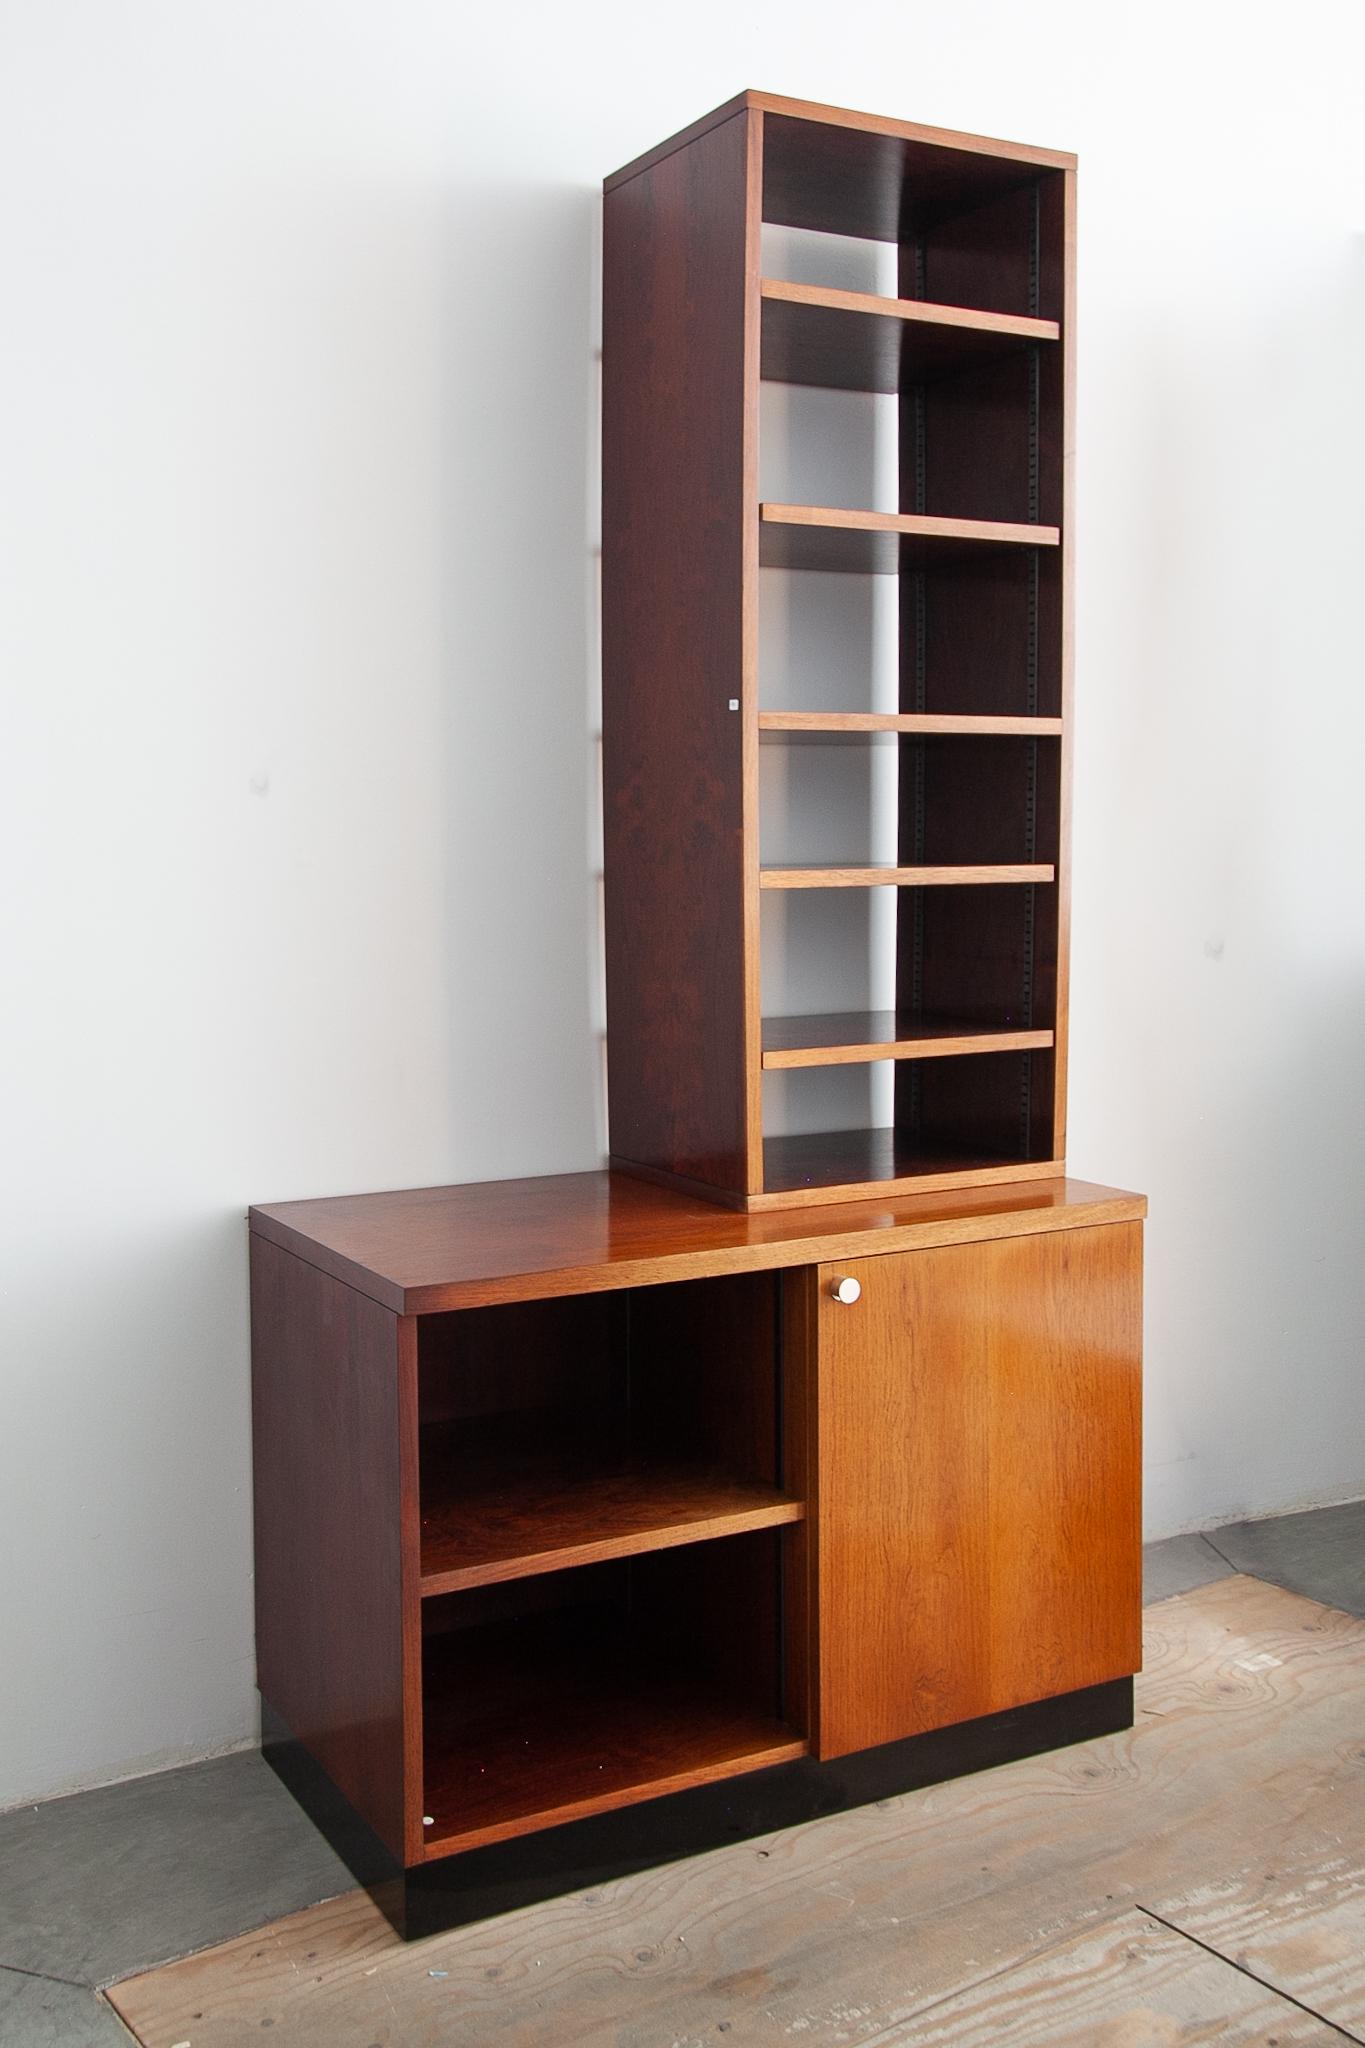 Hand-Crafted Alfred Hendrickx Cabinet, Sideboard with Top Book Shelves, 1958 for Belform For Sale